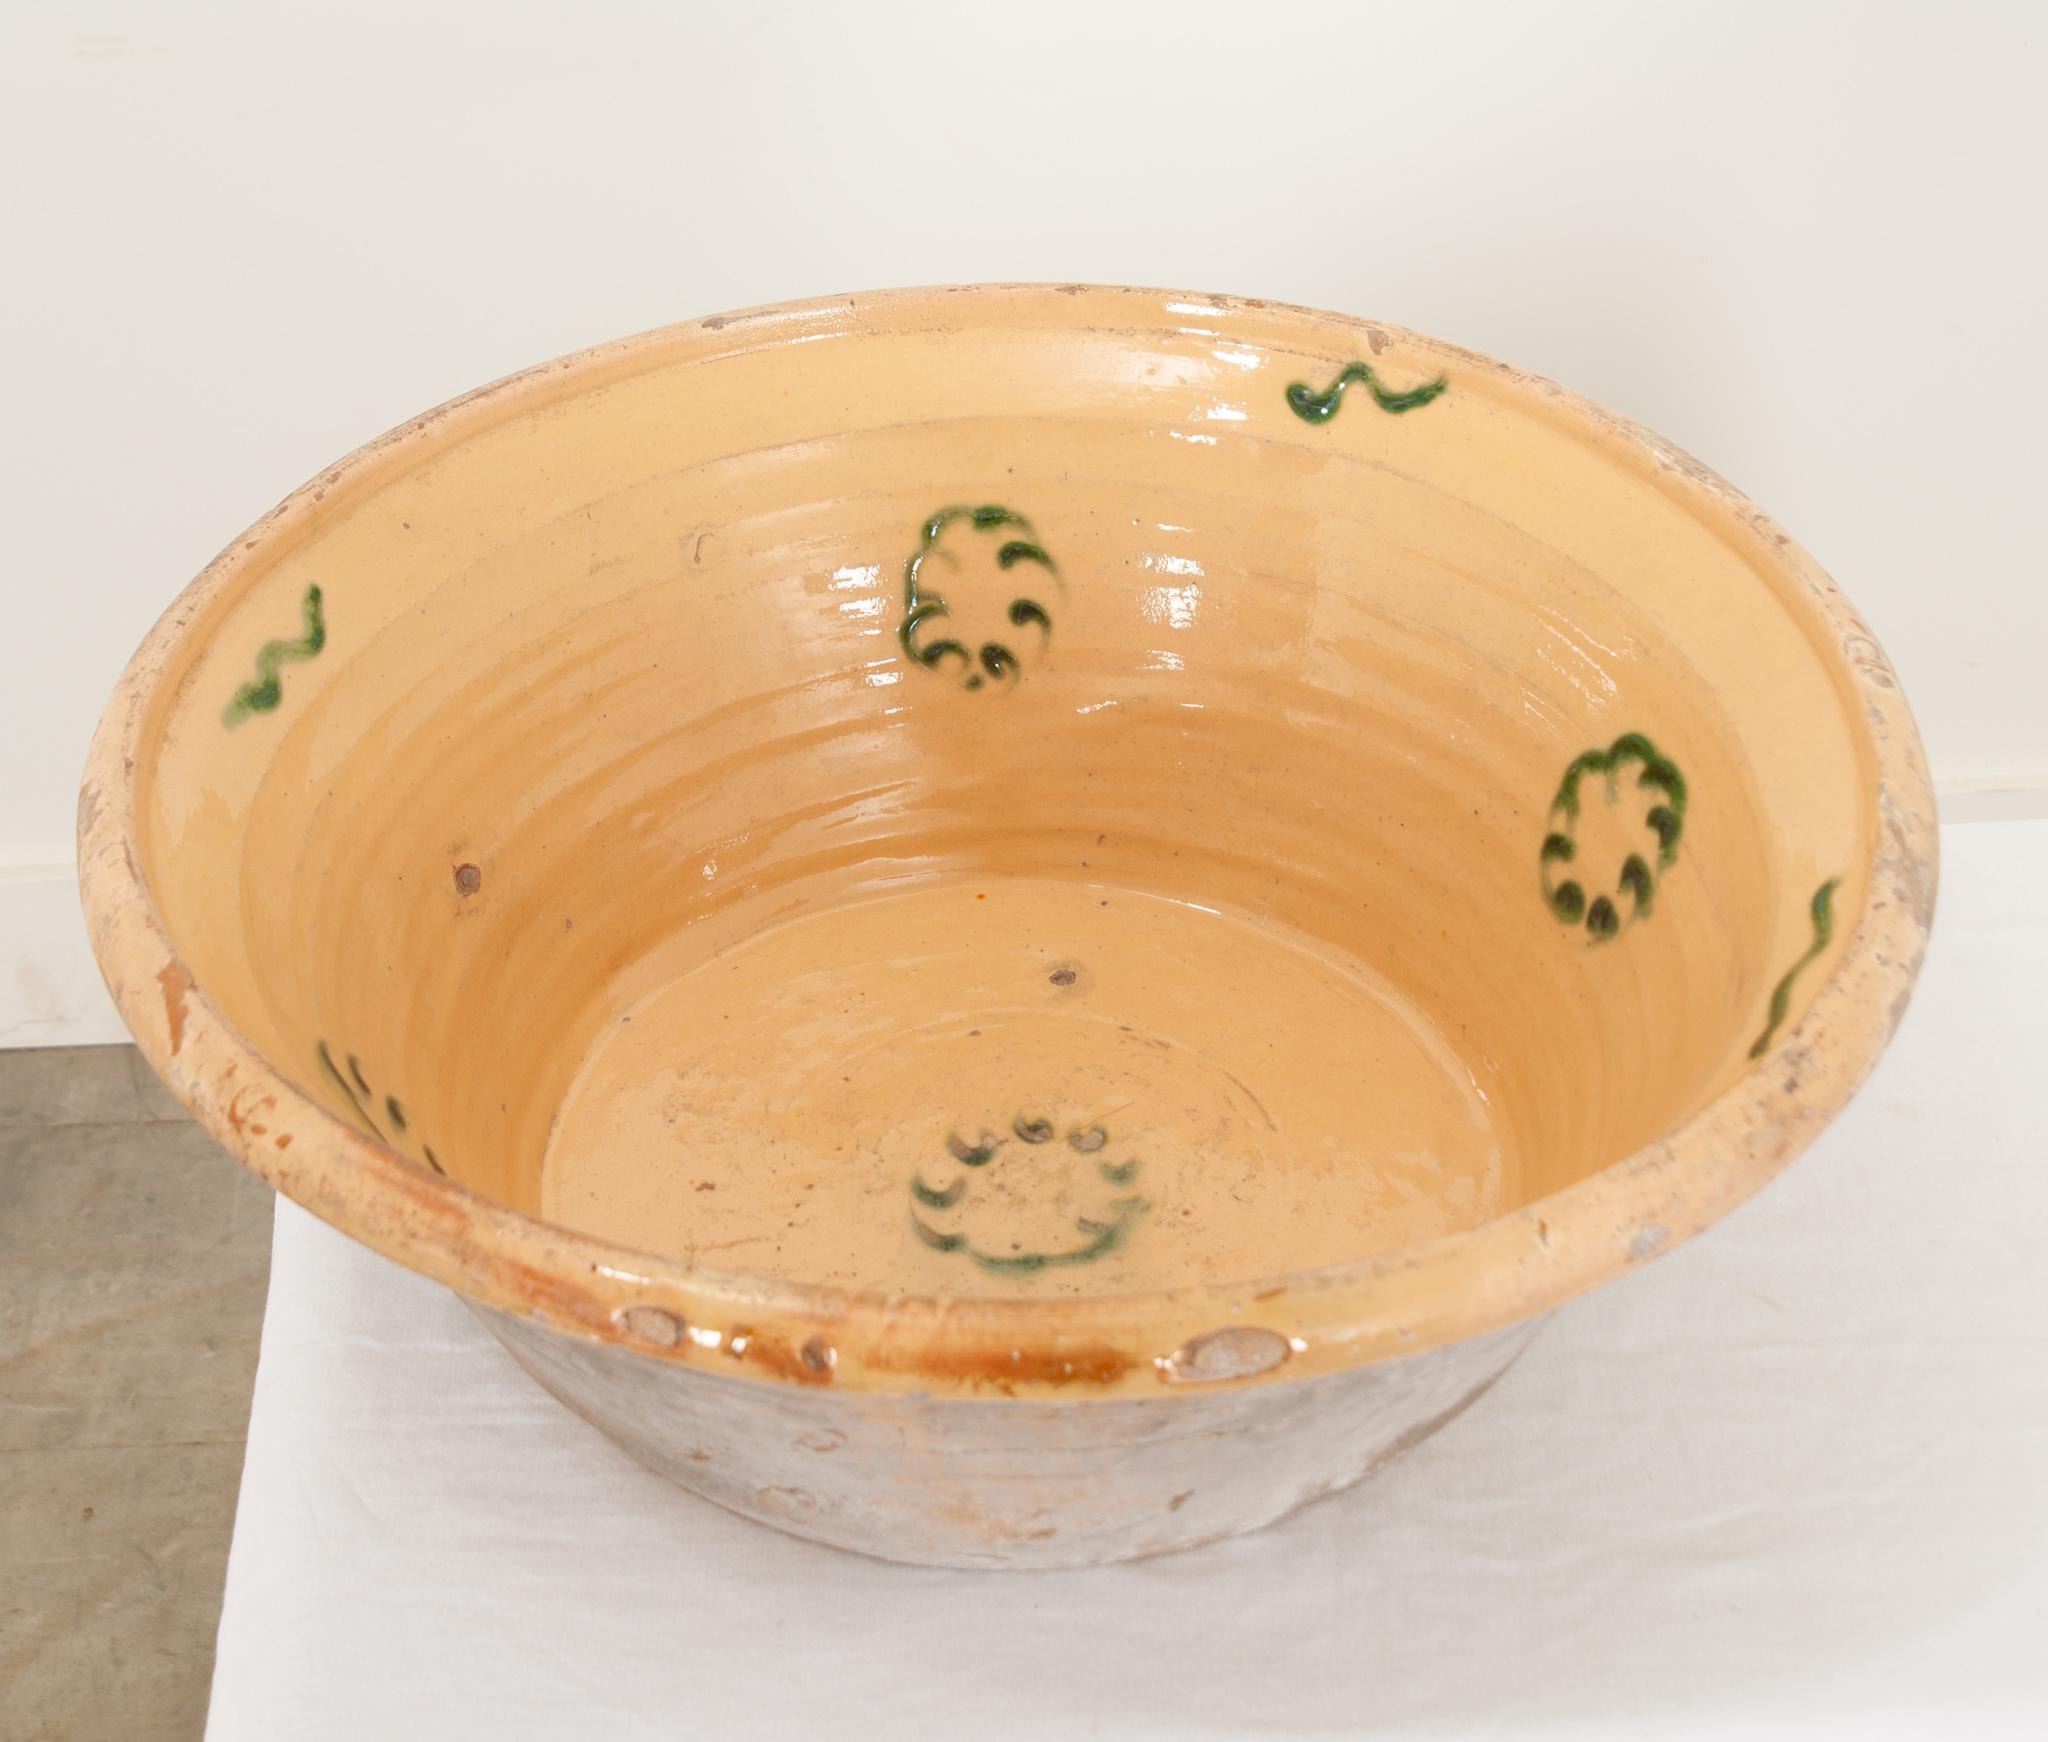 A fine mixing bowl made during the 1850’s in France. The bowl has been glazed with a rich, glossy yellow and whimsical green floral form on the interior. This beautiful example of antique kitchenalia will make a wonderful centerpiece for your dining